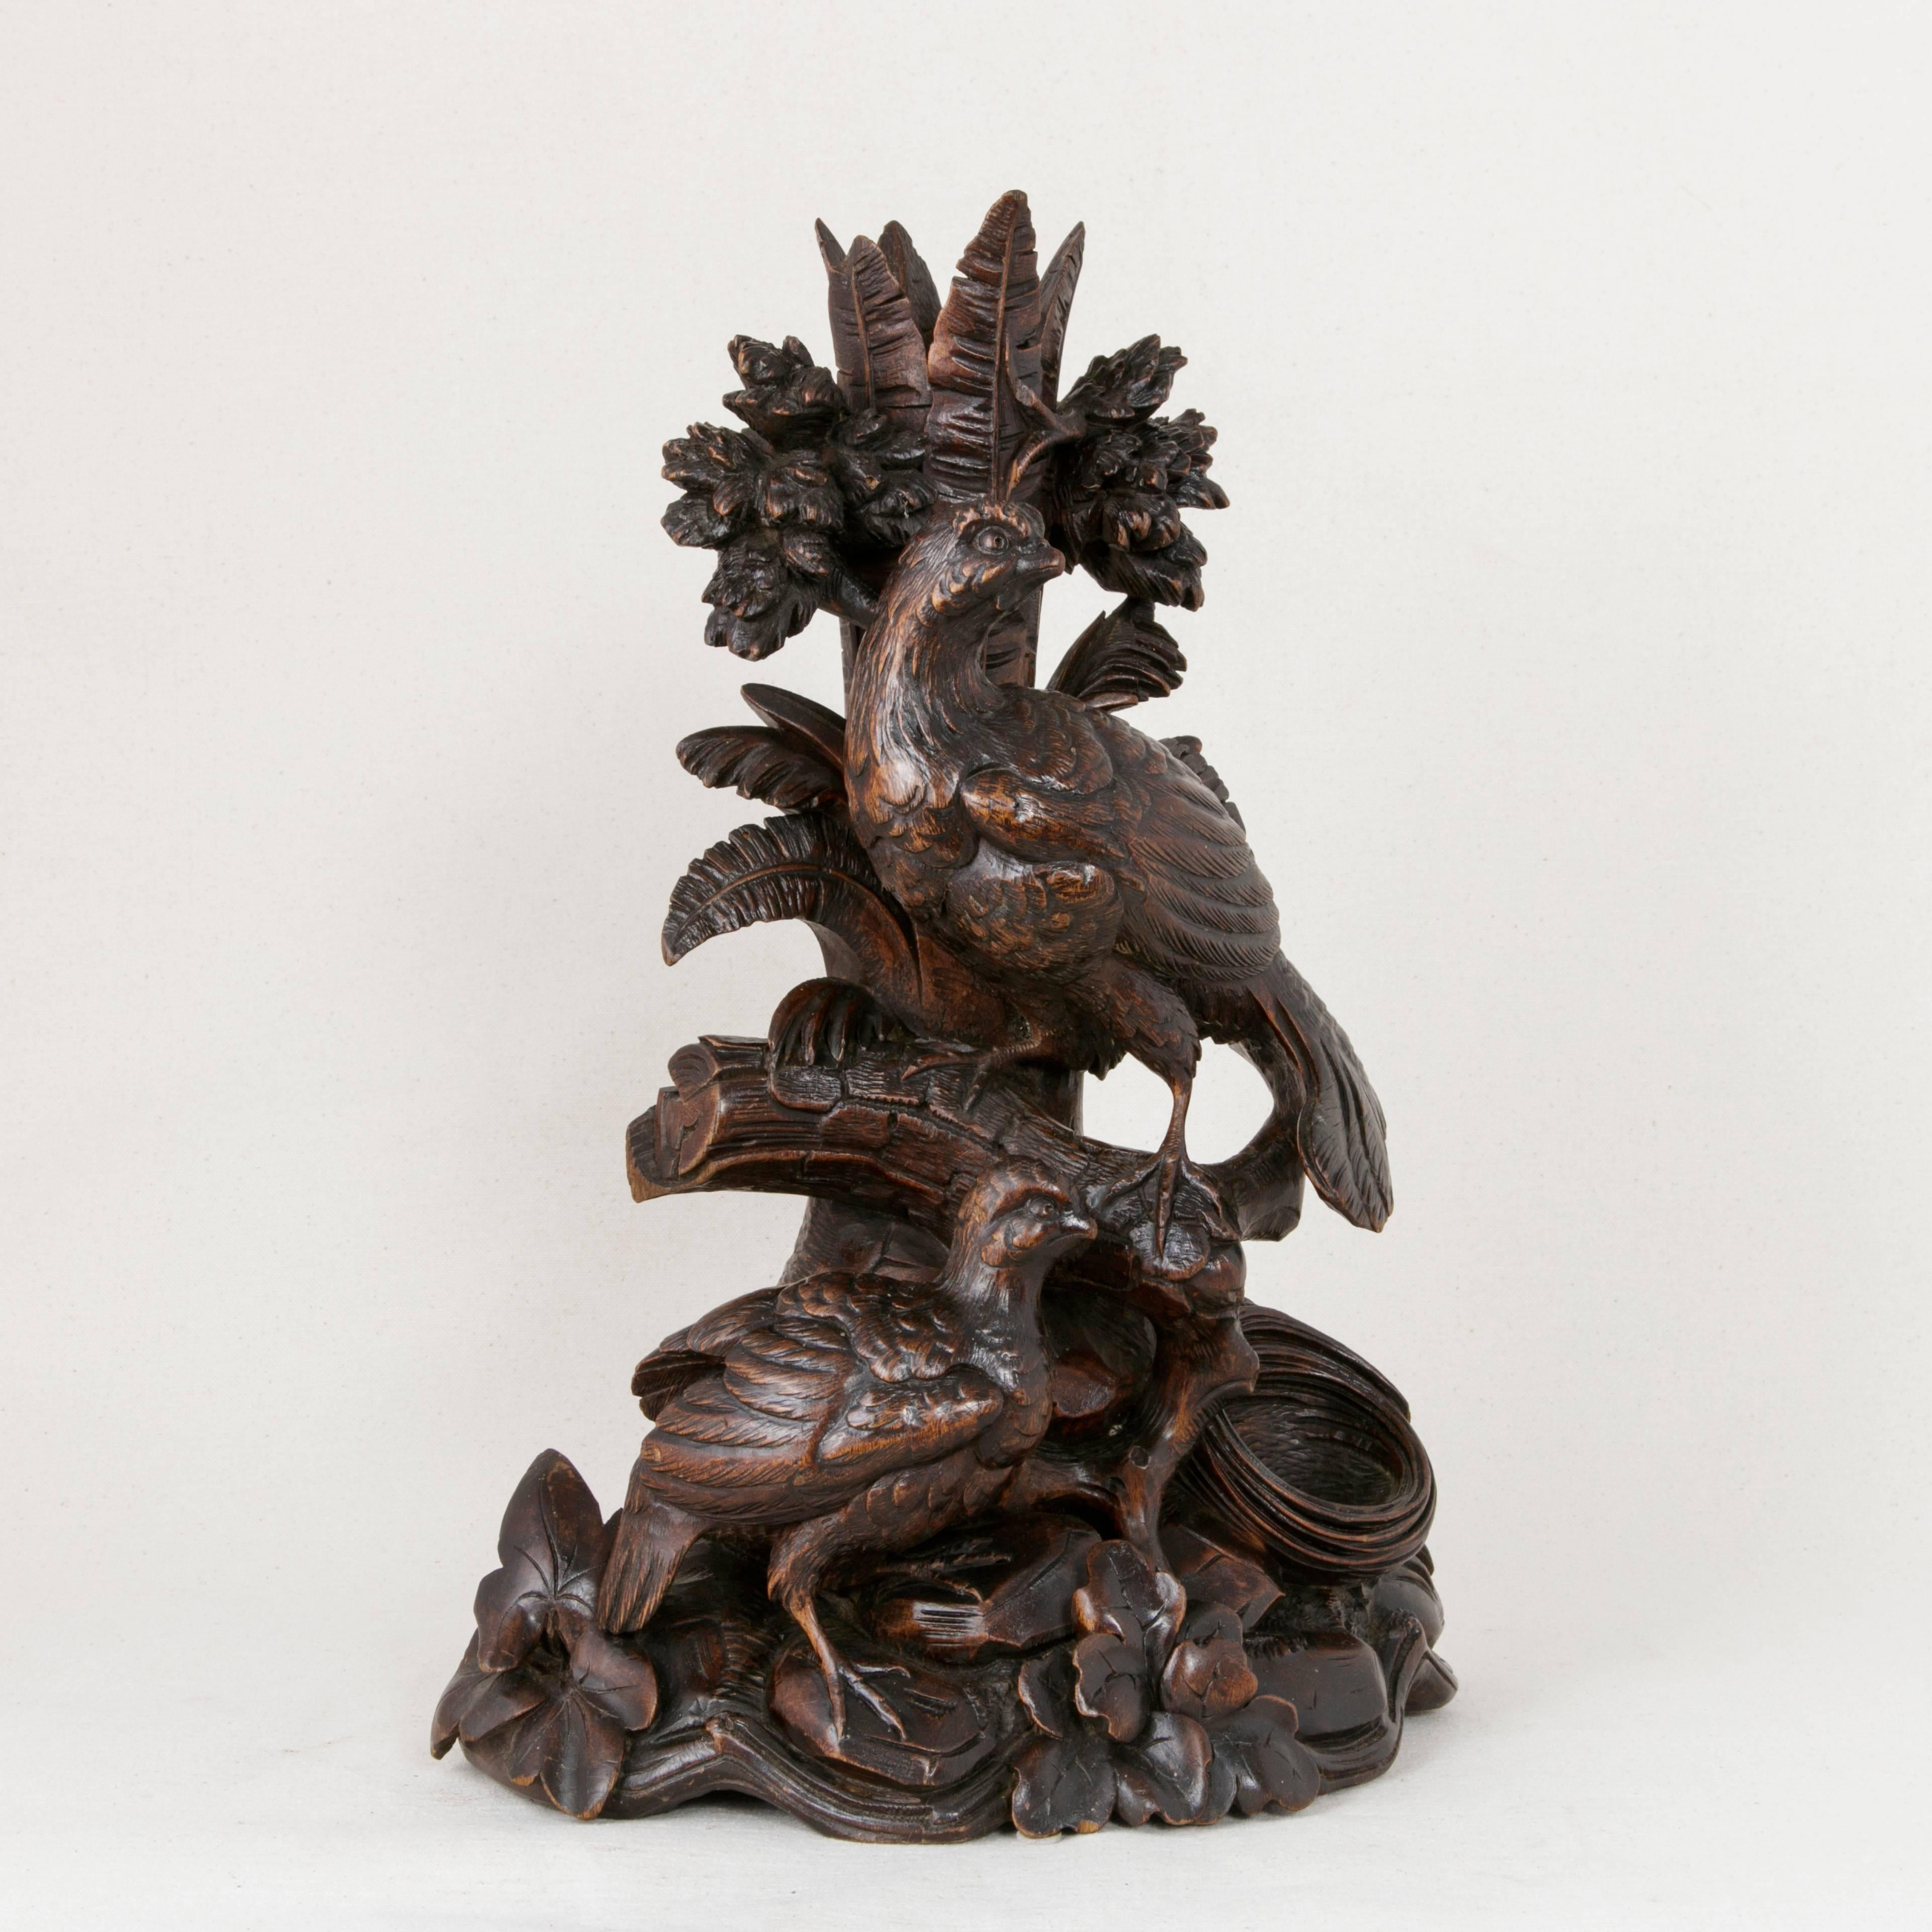 This large hand-carved French Black Forest vase or candlestick features a central tree trunk rising from a rocky base with a pair of grouse game birds perched nearby. An empty nest lays at the base of the tree. Large leaves extend upward from the